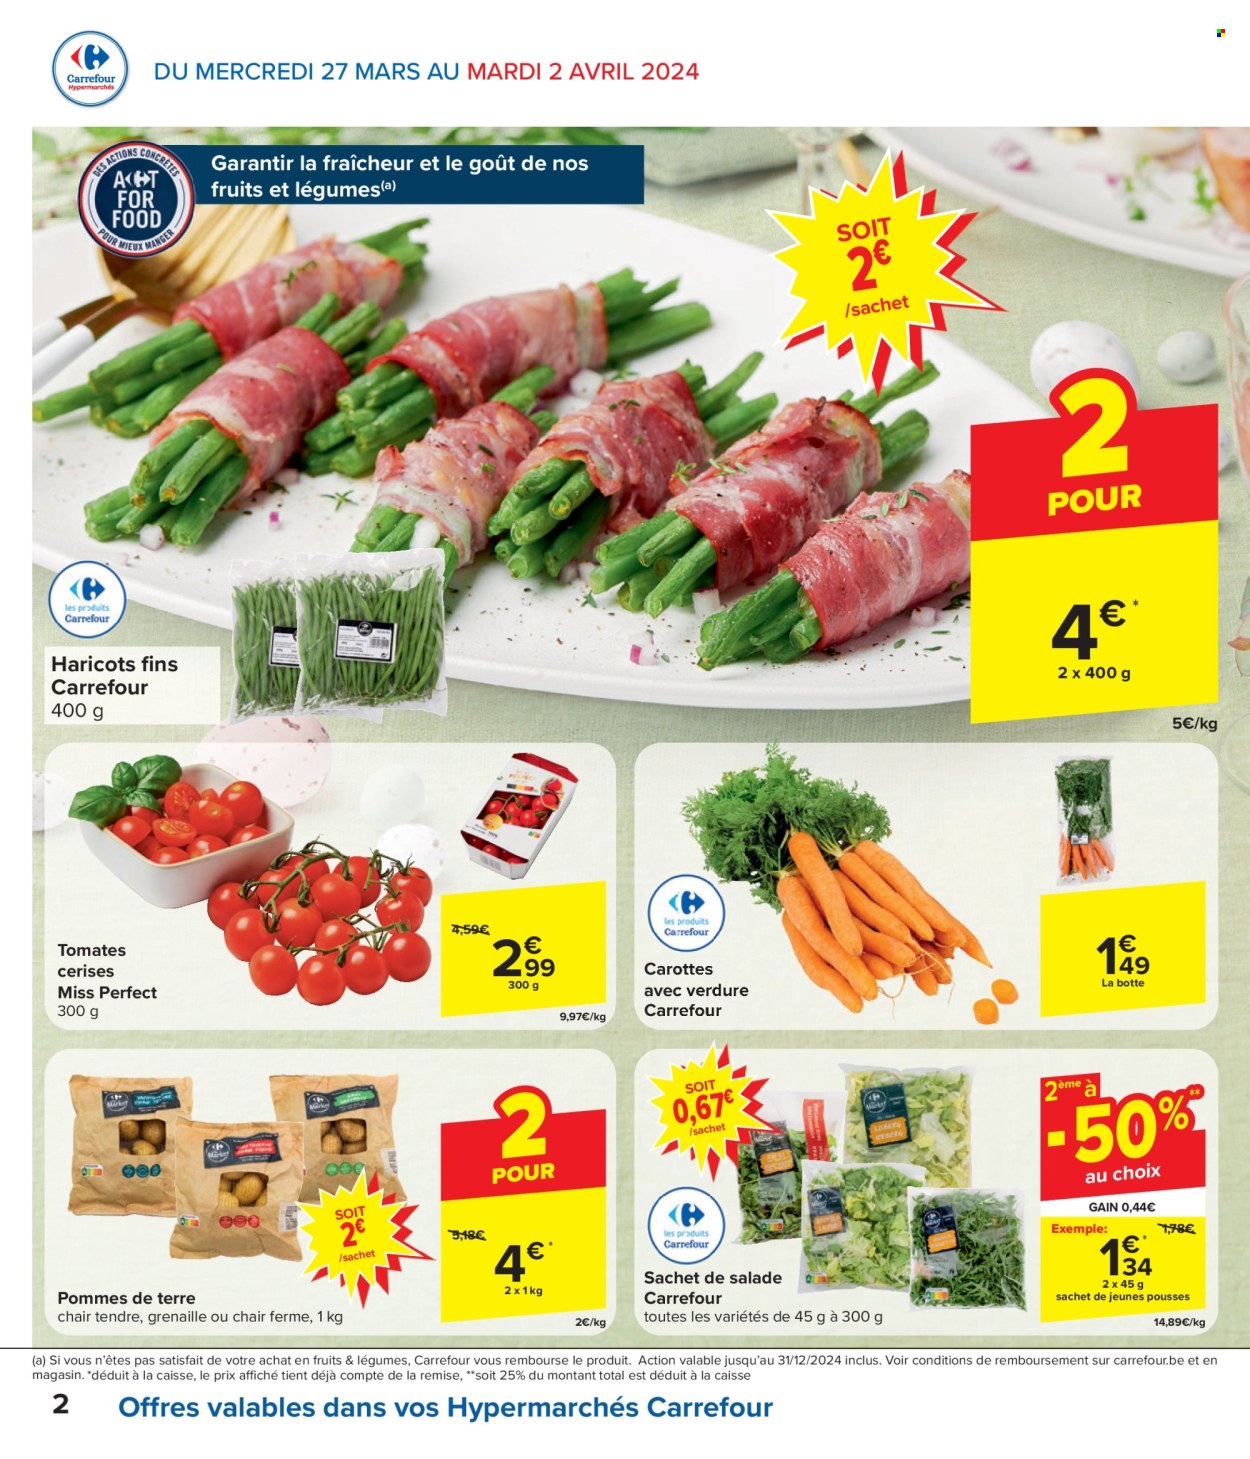 Catalogue Carrefour hypermarkt - 27.3.2024 - 8.4.2024. Page 2.